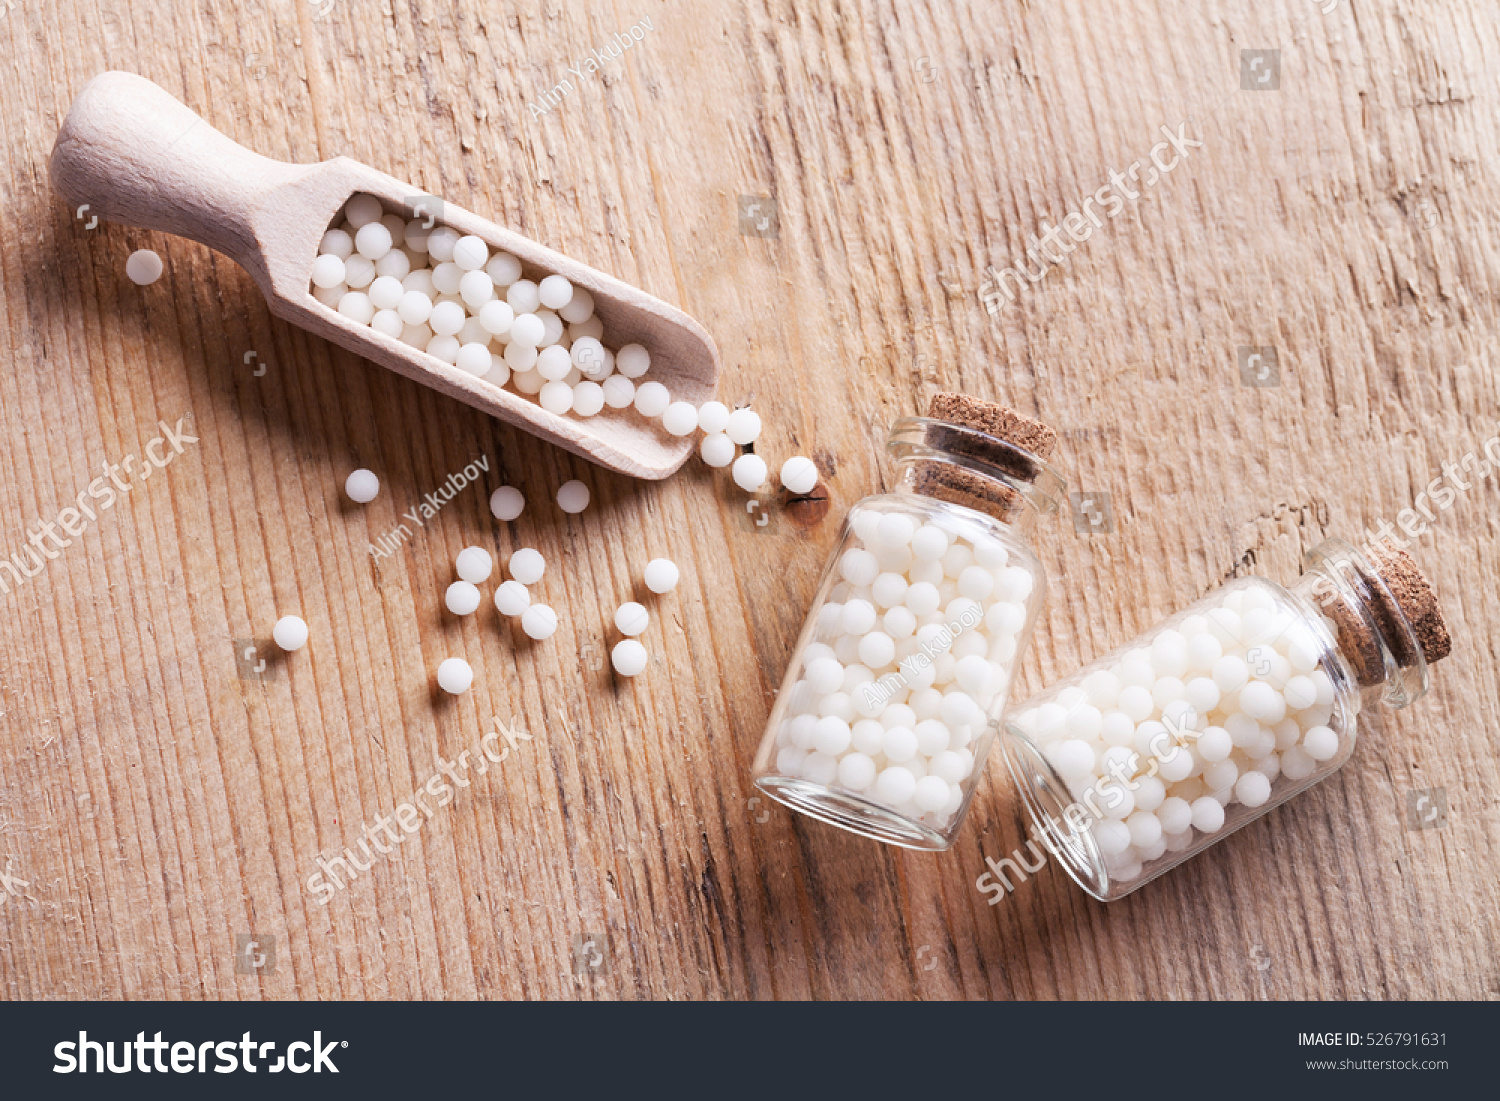 Closeup image of homeopathic medicine consisting of the pills and a bottle containing a liquid homeopathic substance.
 #526791631